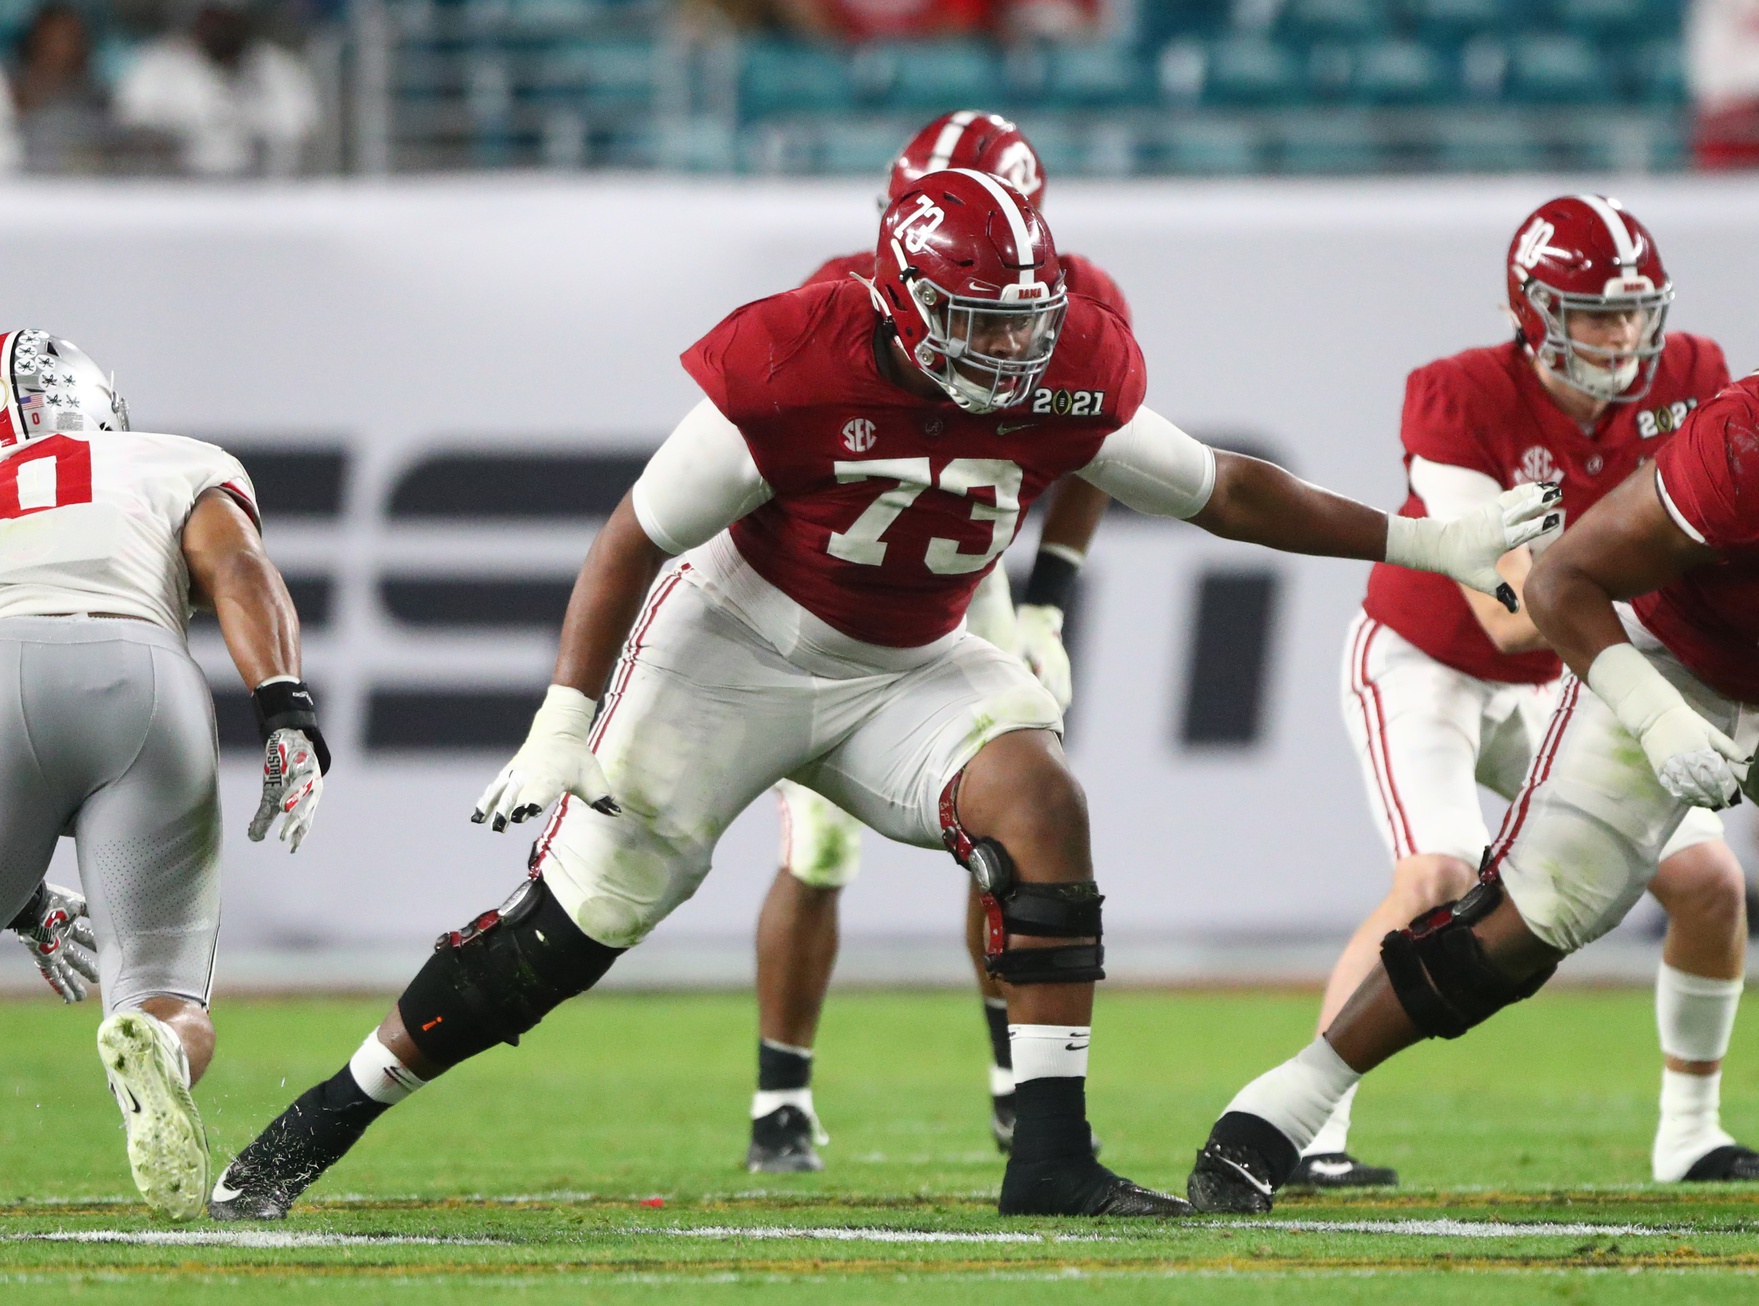 Alabama left tackle Evan Neal tops The Athletic's annual 'Freaks List'